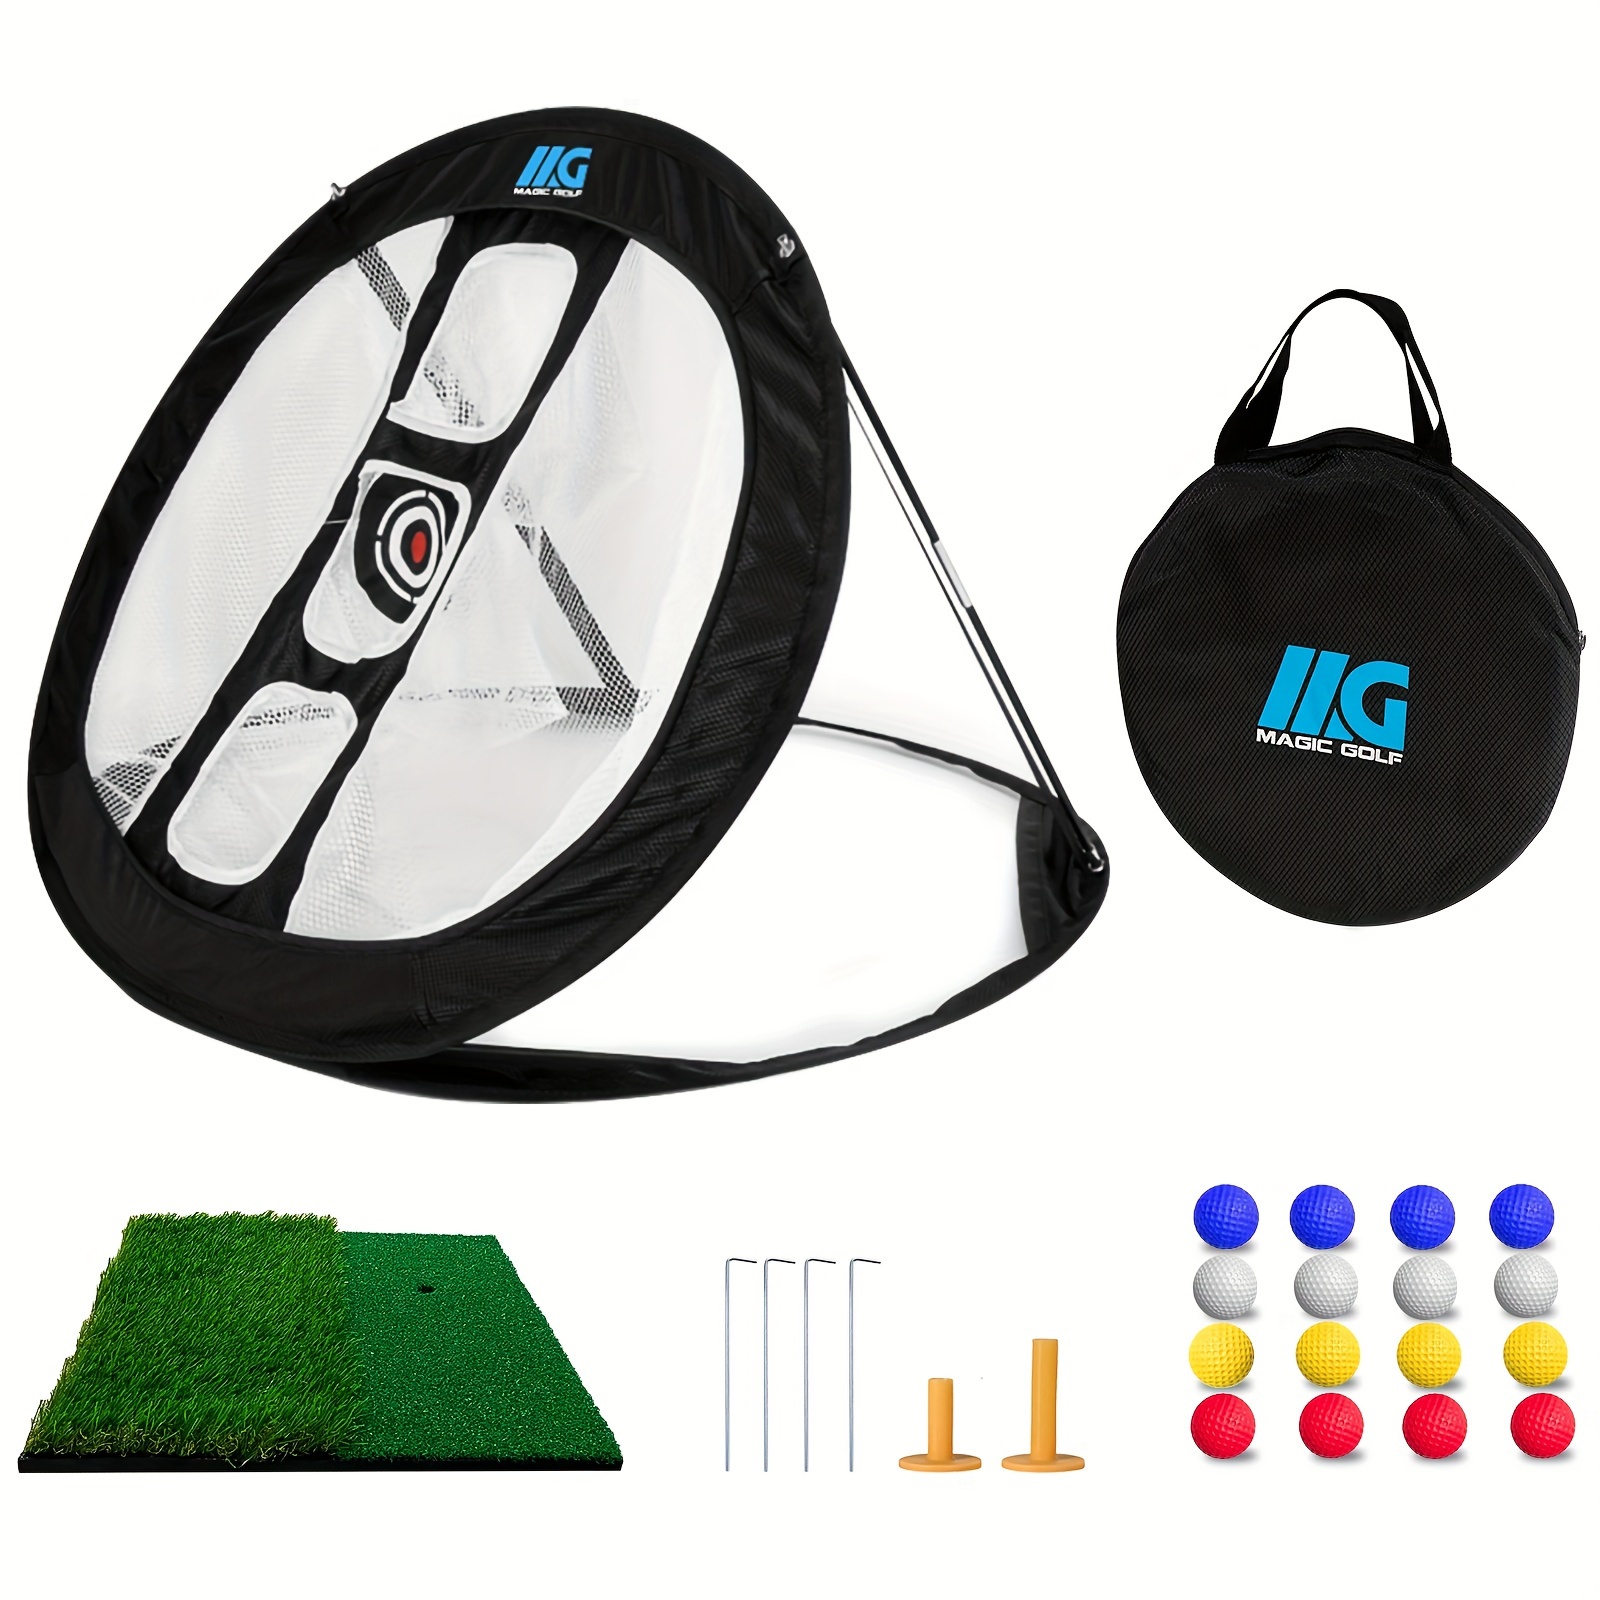 

Pop-up Chipping Net With Turf Hitting Mat Set Indoor Outdoor - 3 Target Golf Practice Hitting Net Training Aids Gift - 16 Golf Practice Balls & 4 Ground Stakes, With Portable Bag